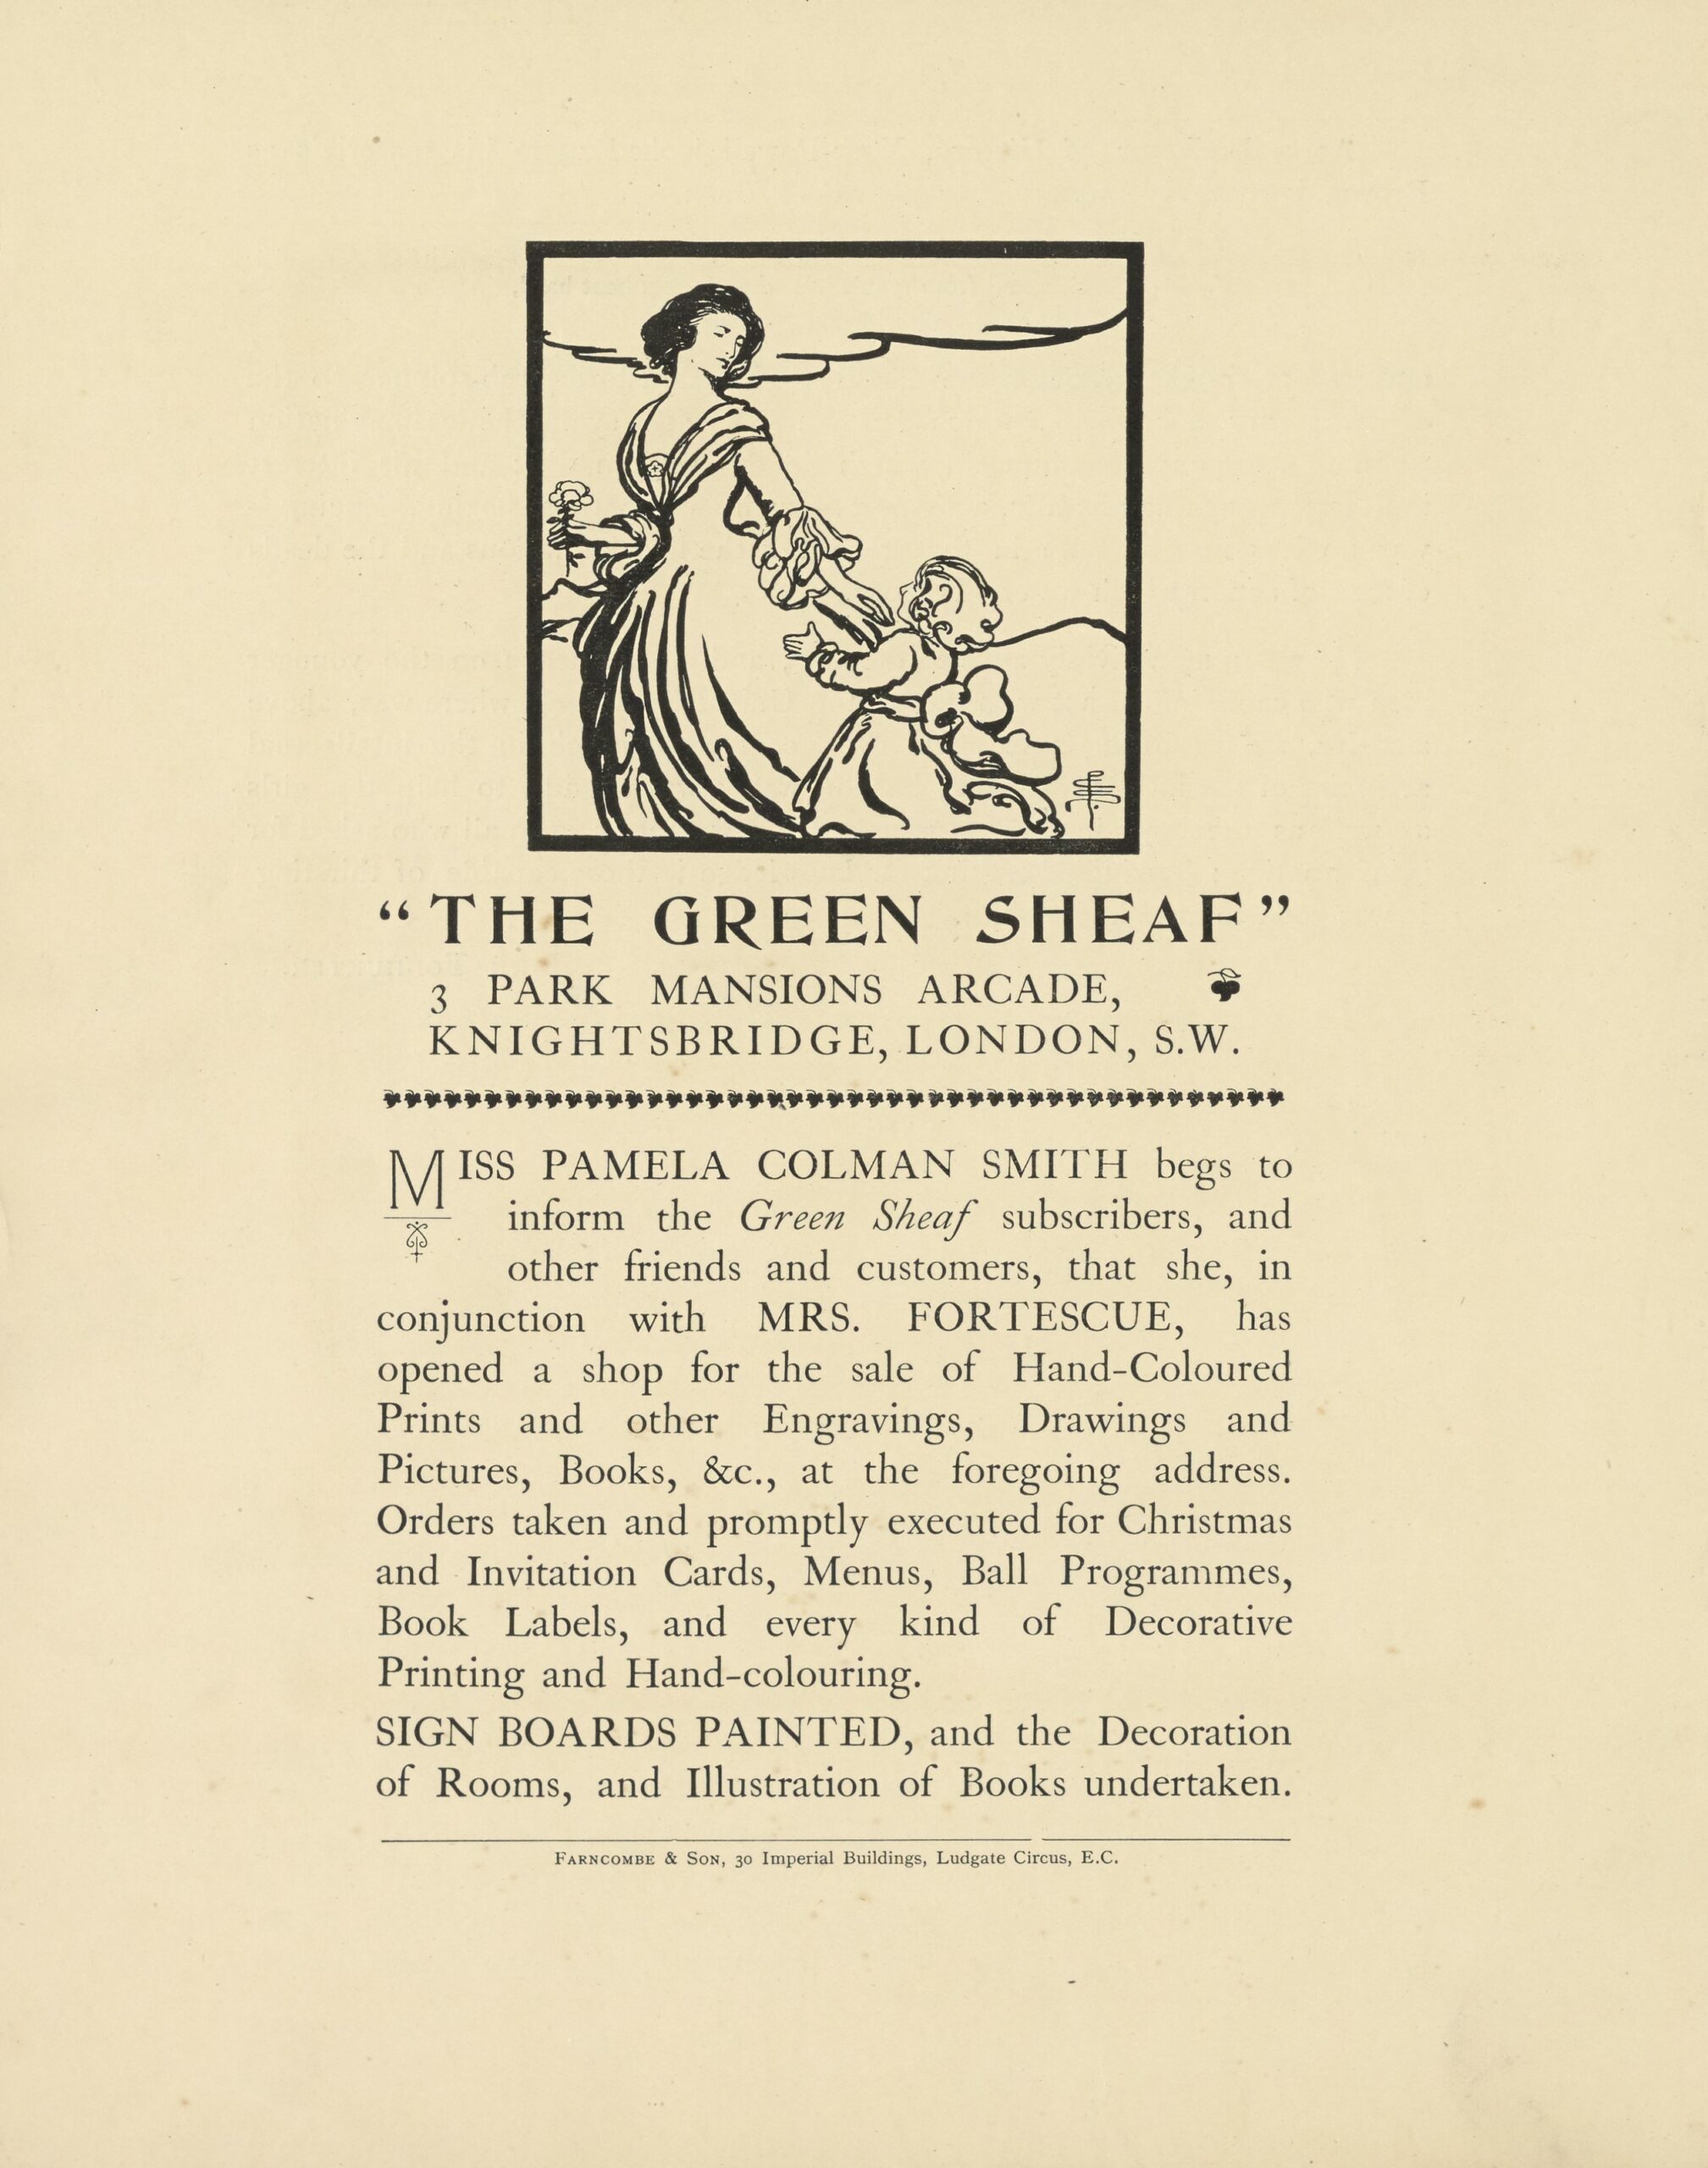 The pen-and-ink illustrated advertisement is outlined with a thick black rectangular border, in portrait orientation, centered above the text of the advertisement. In the left foreground, a woman walks to the left, with her arm outstretched and face turned back to look toward a young child. The dark-haired woman wears a long flowing gown and shawl, and holds a rose in her right hand. The child, facing toward the woman and away from the viewer, has light hair, wears a long white dress with a bow tied at the back, and reaches its arms up toward the woman. In the background are mountains and a cloudy sky. The artist’s monogram is in the bottom right corner of the frame.